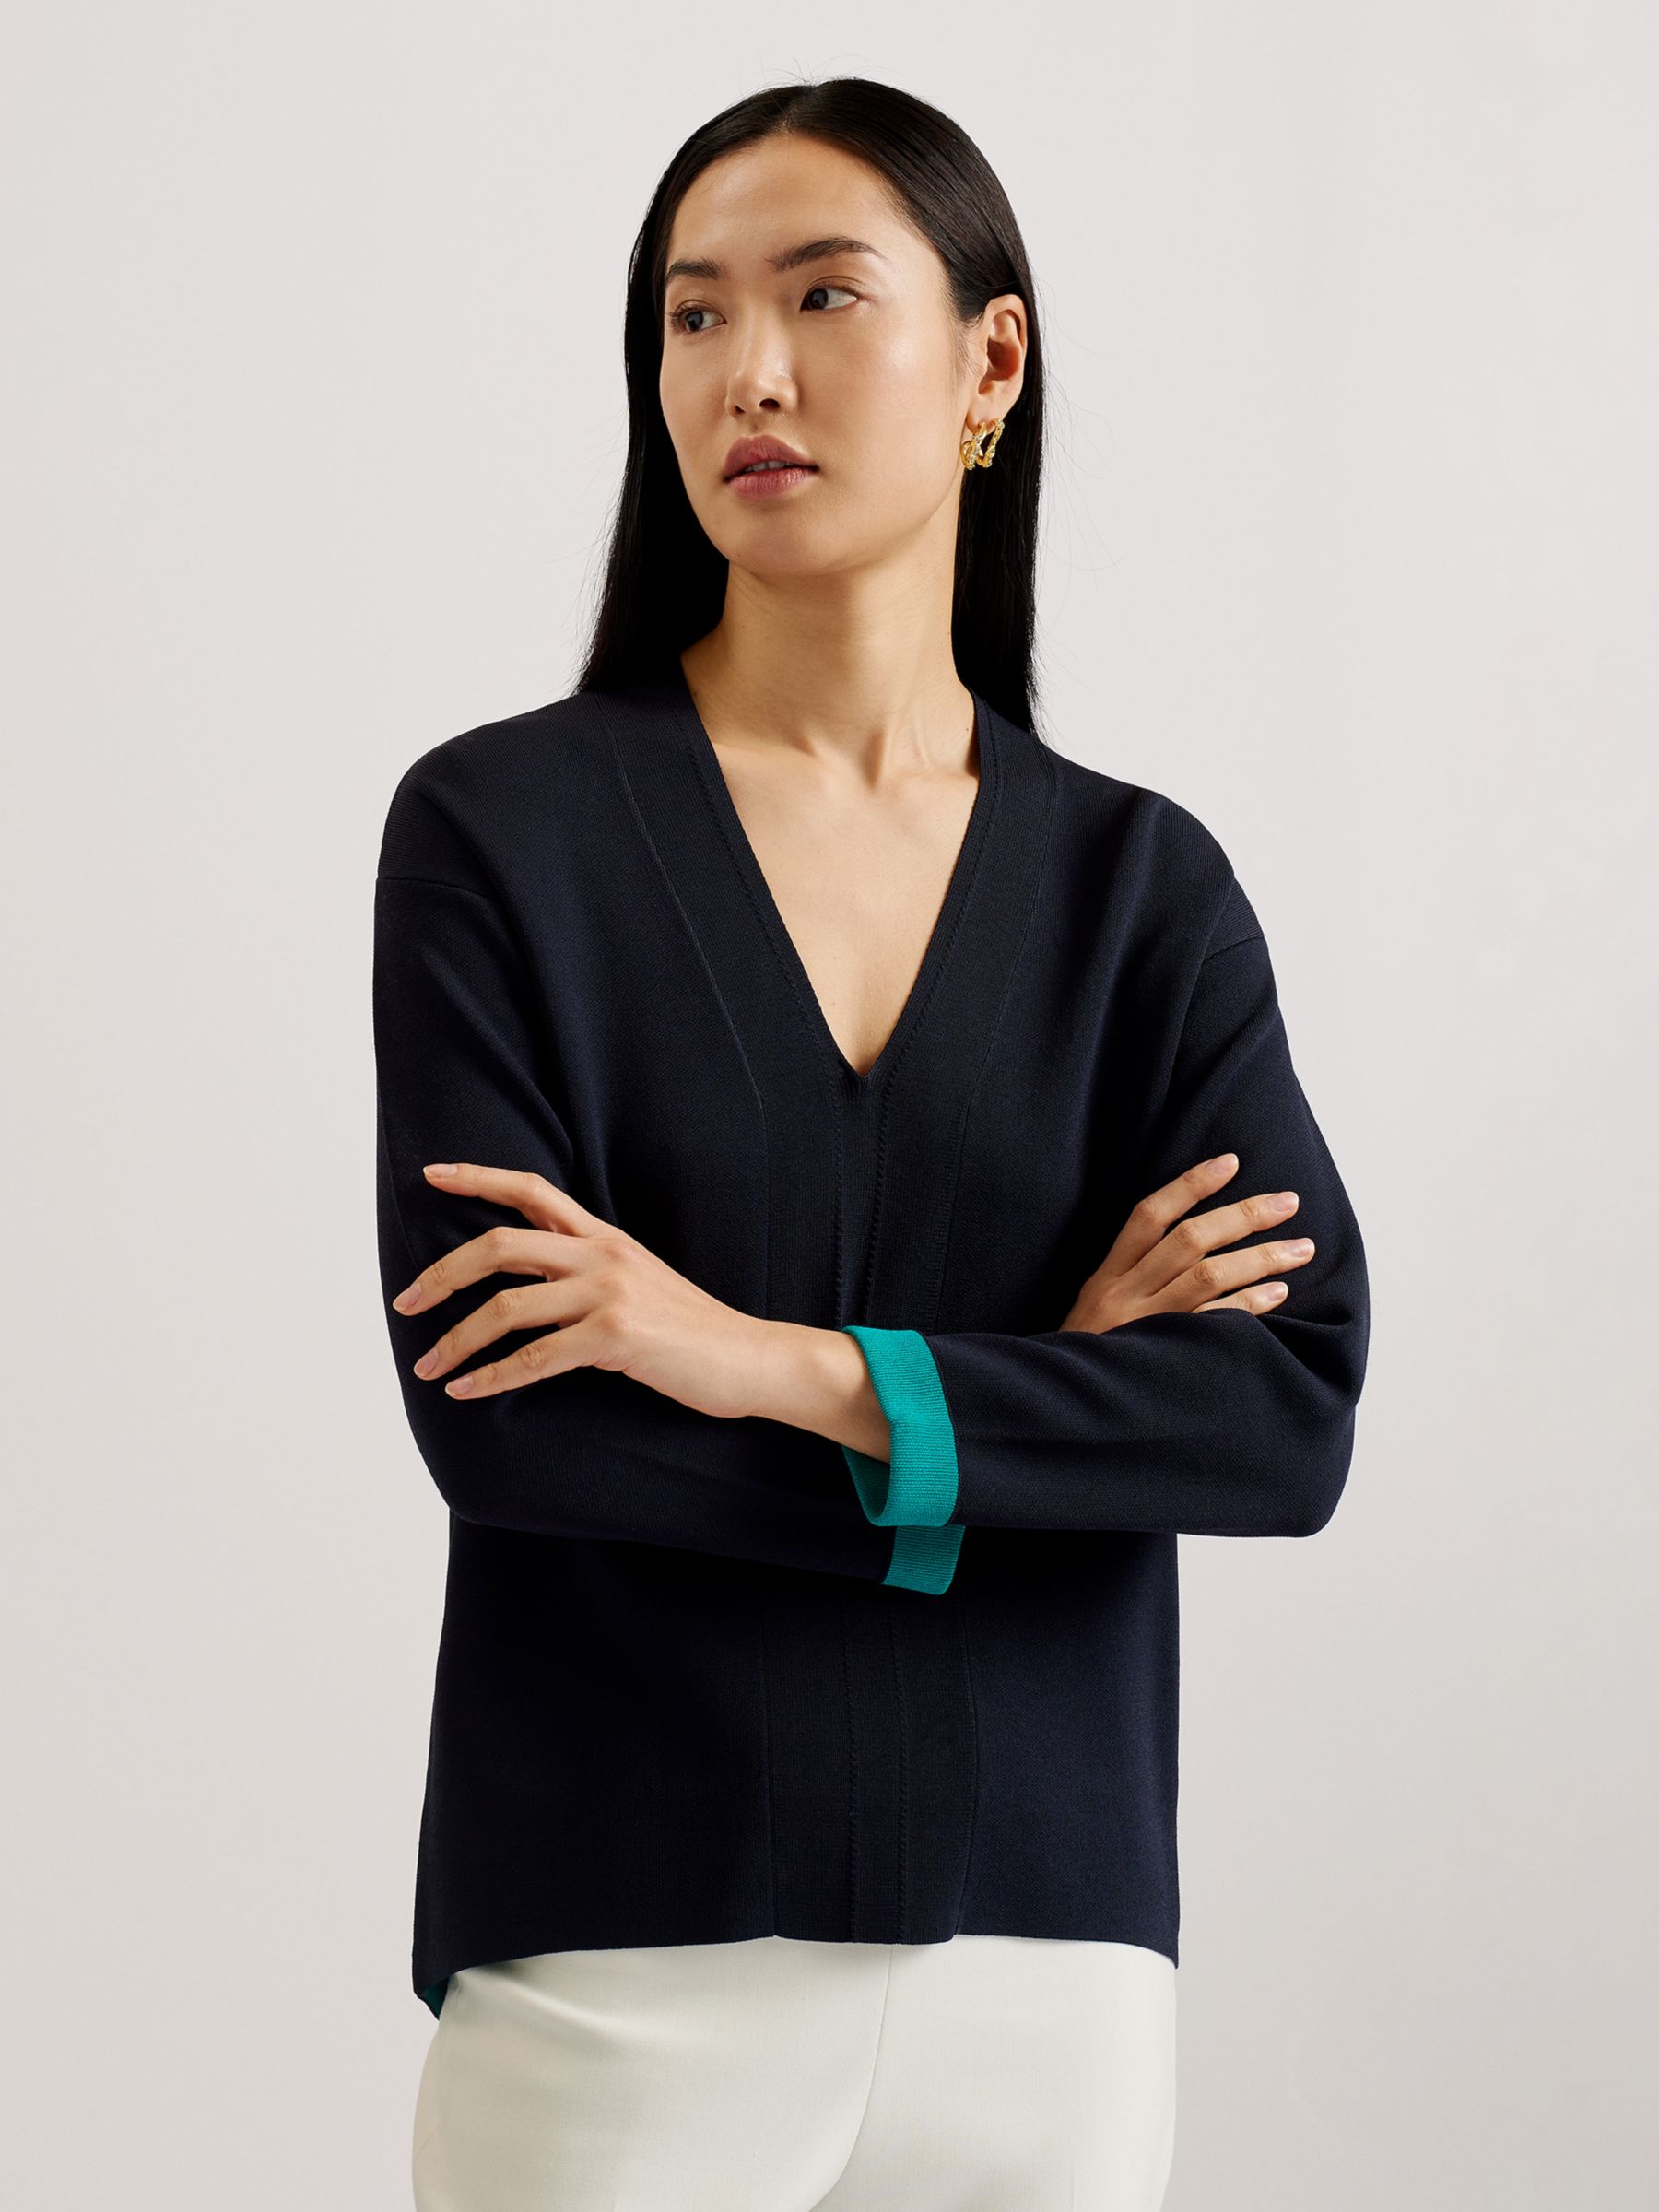 Buy Ted Baker Mikelaa Twisted Neck Jumper, Navy/Turquoise Online at johnlewis.com